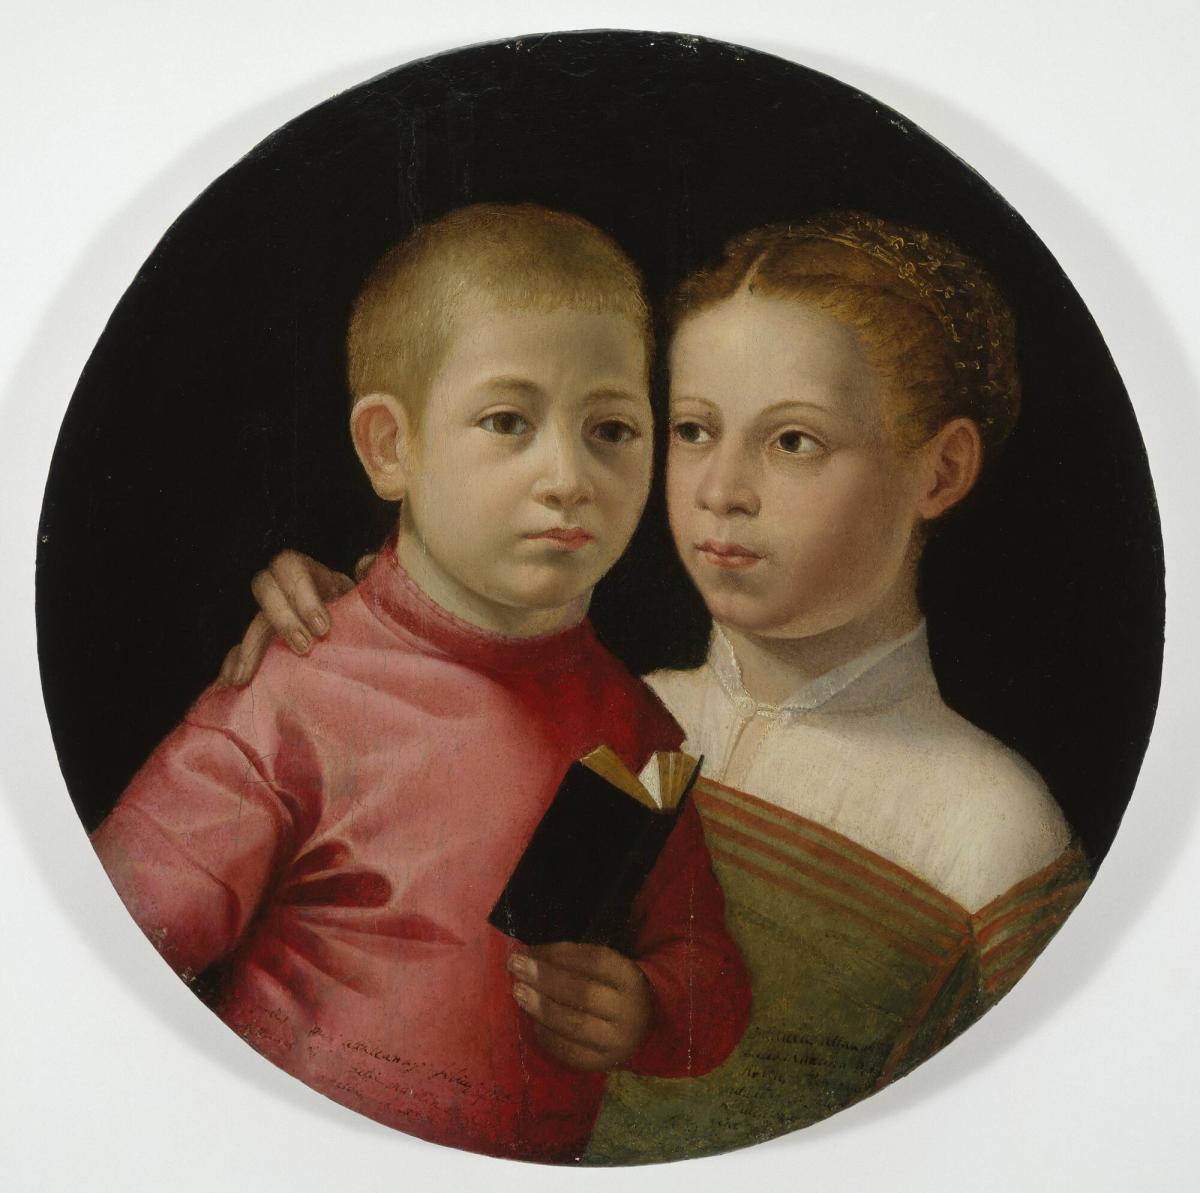 Double Portrait of a Boy and Girl of the Attavanti Family